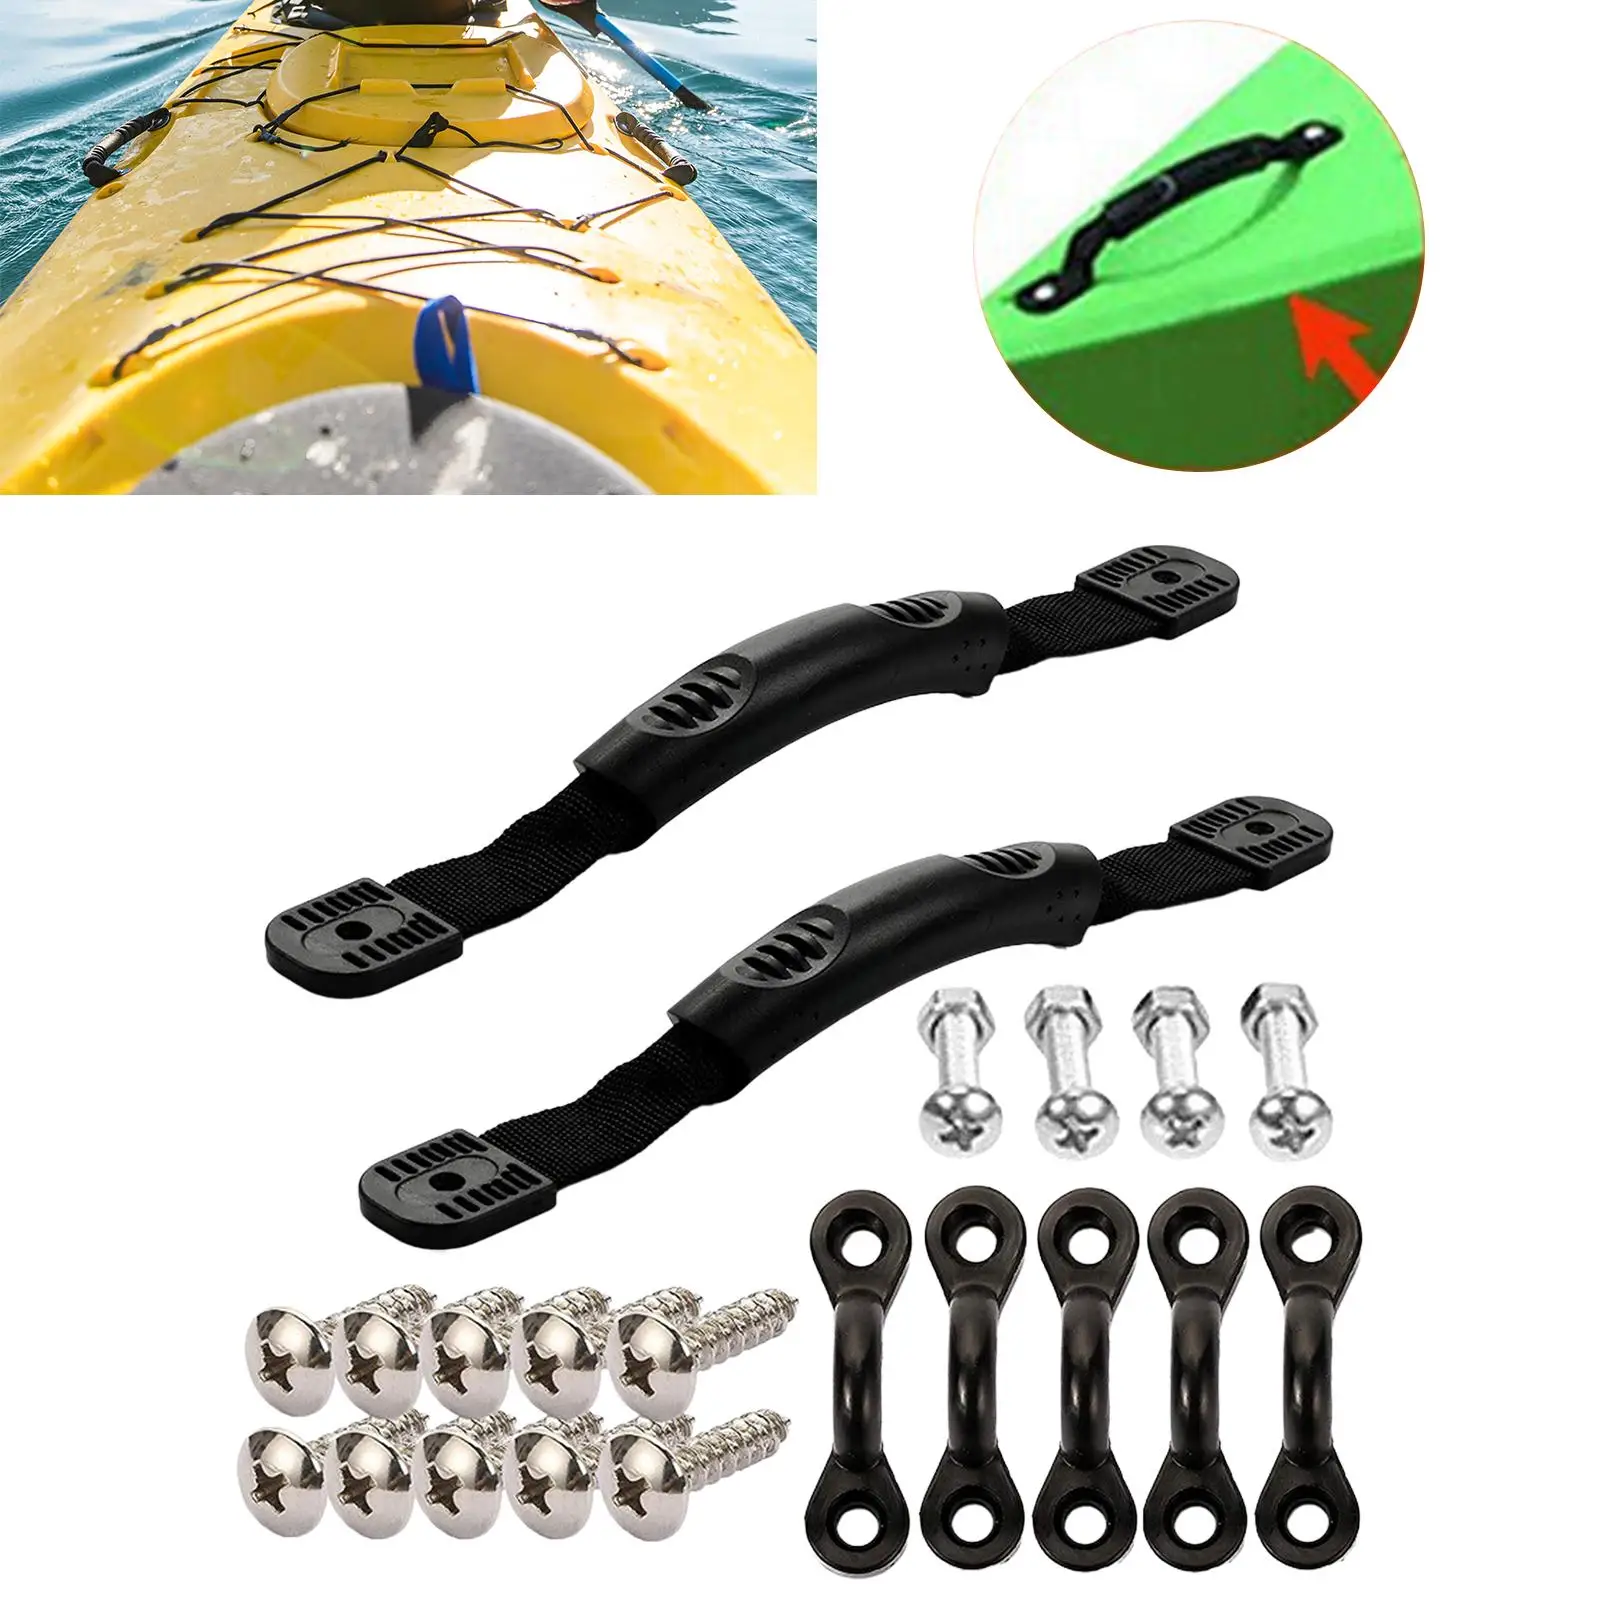 Kayak Canoe Carry Handles Kayak Side Mount with Pad Eyes with Screws Replacement Canoes Boats Kayak Accessories Kayaks